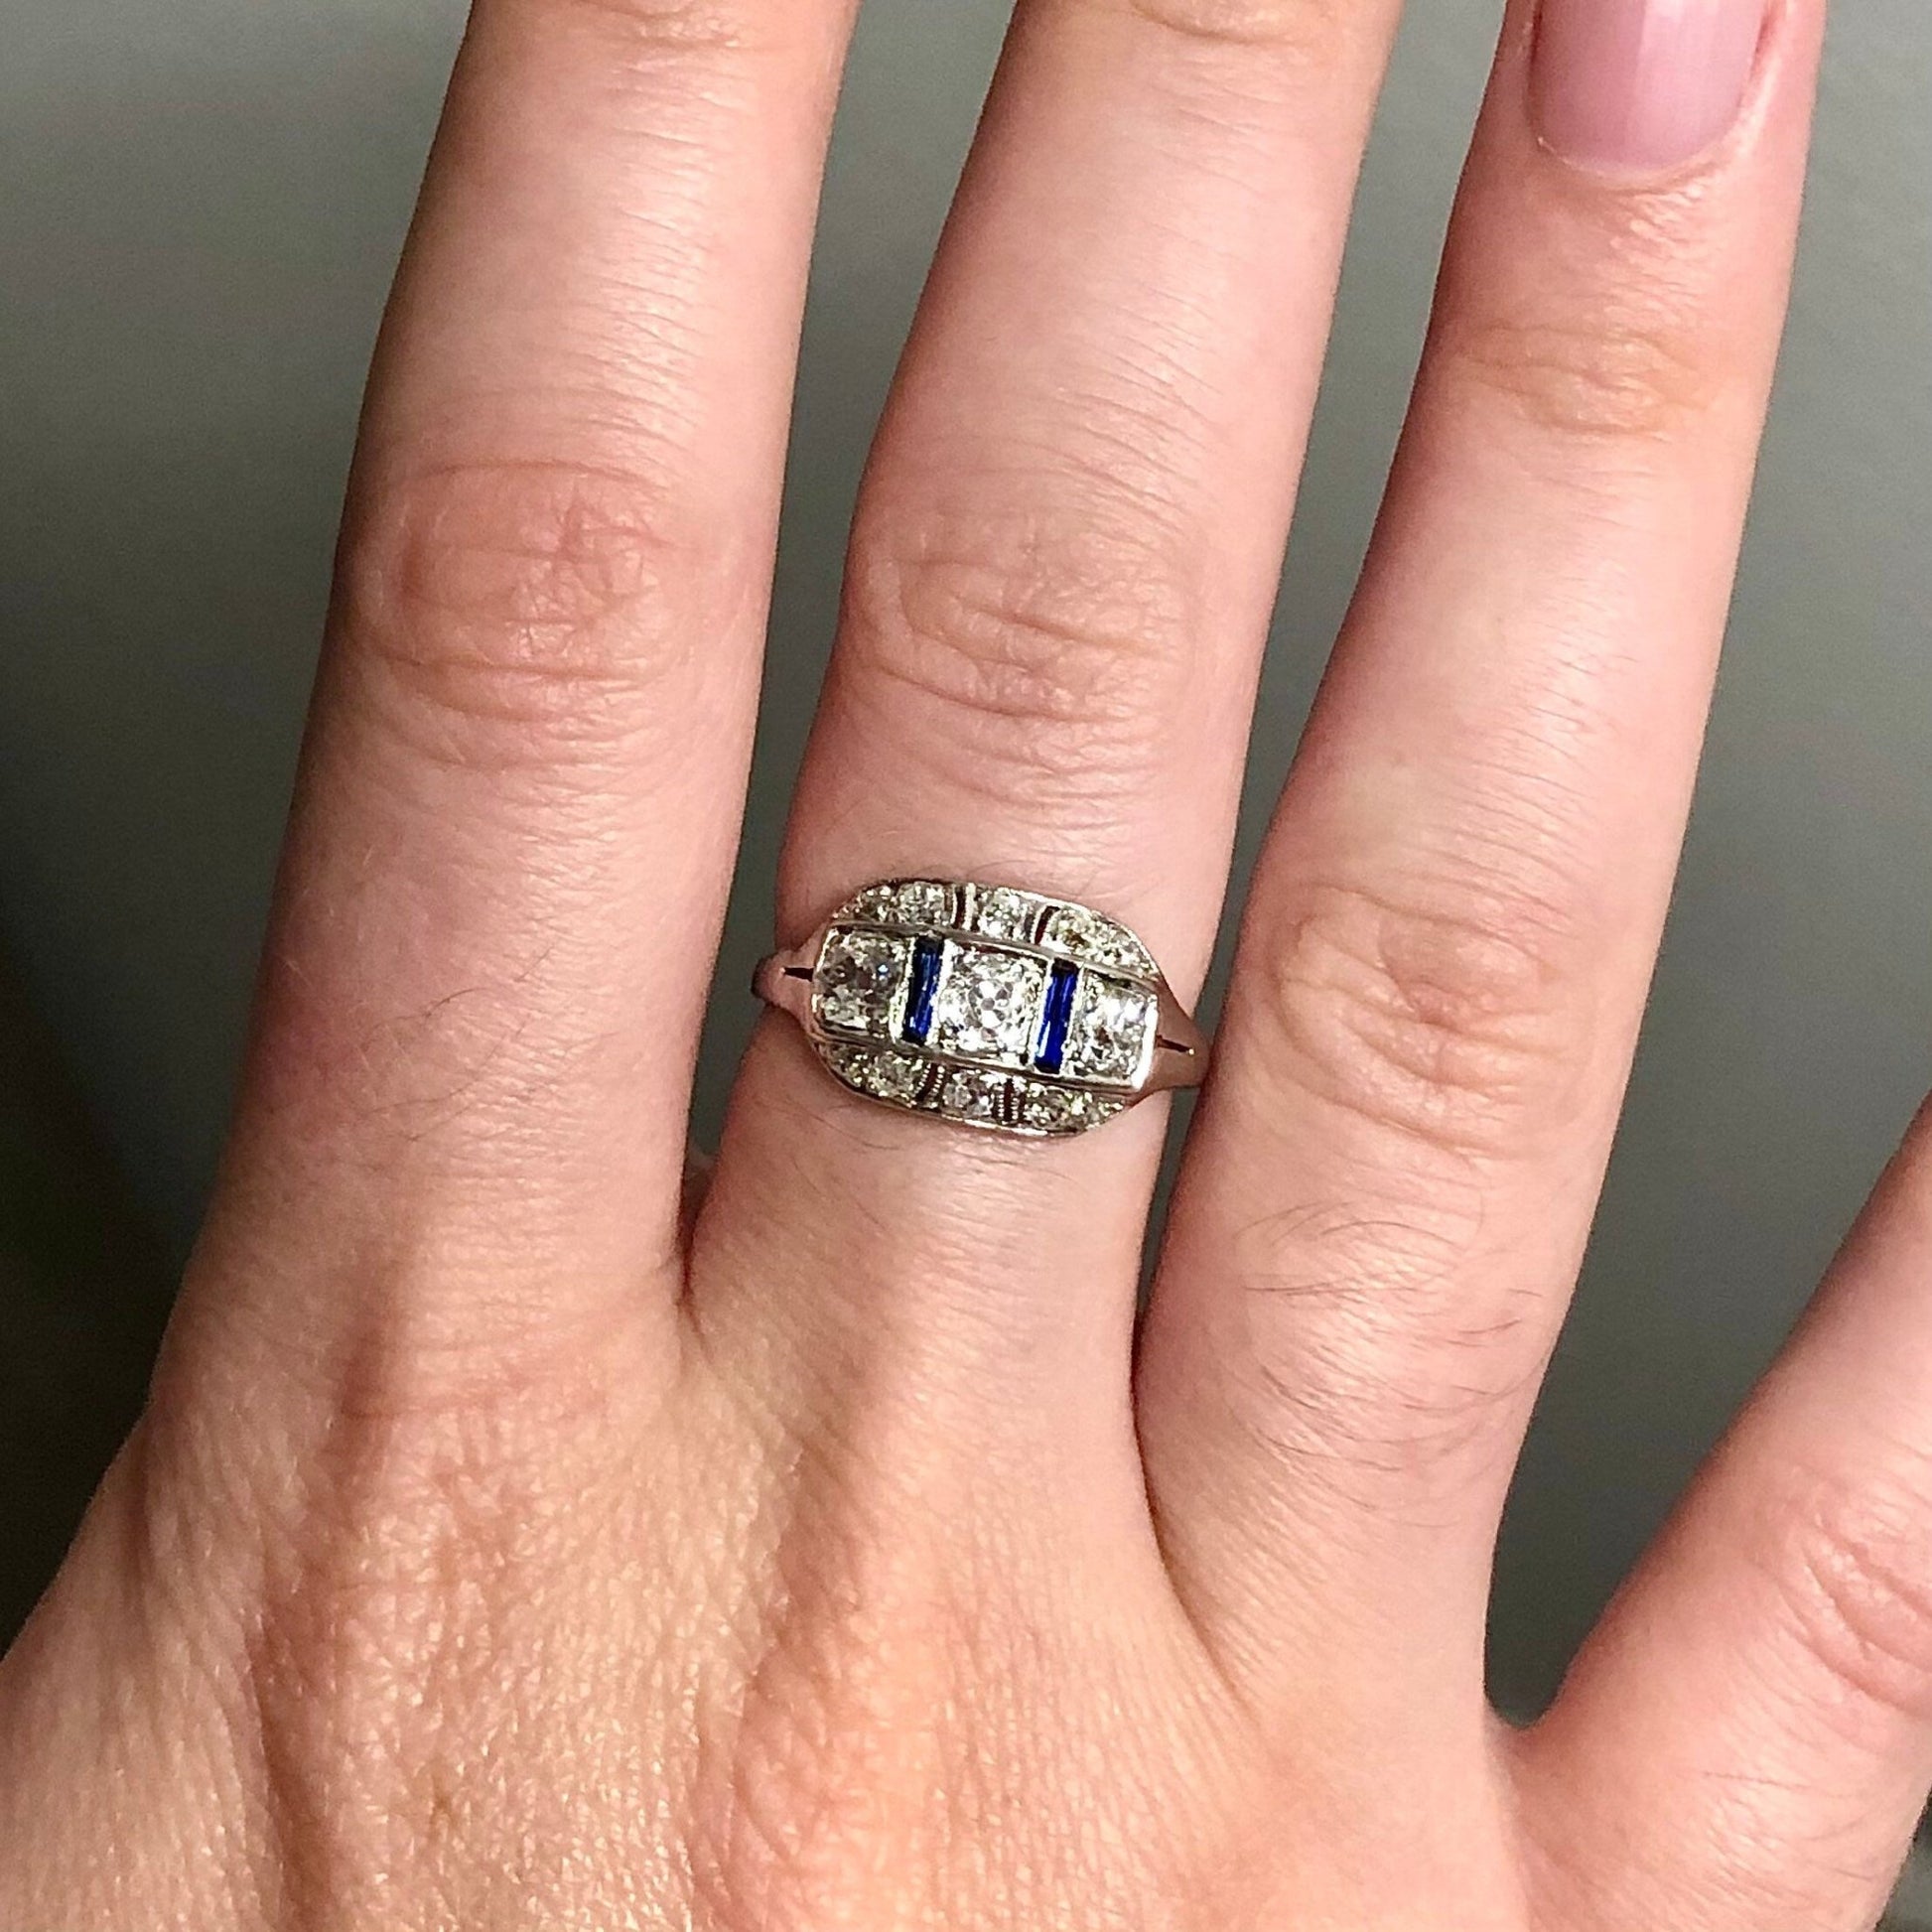 Antique Art Deco Platinum Diamond & Synthetic Sapphire Ring - Antique Vintage Engagement Ring - Cocktail Ring -  Promise Ring